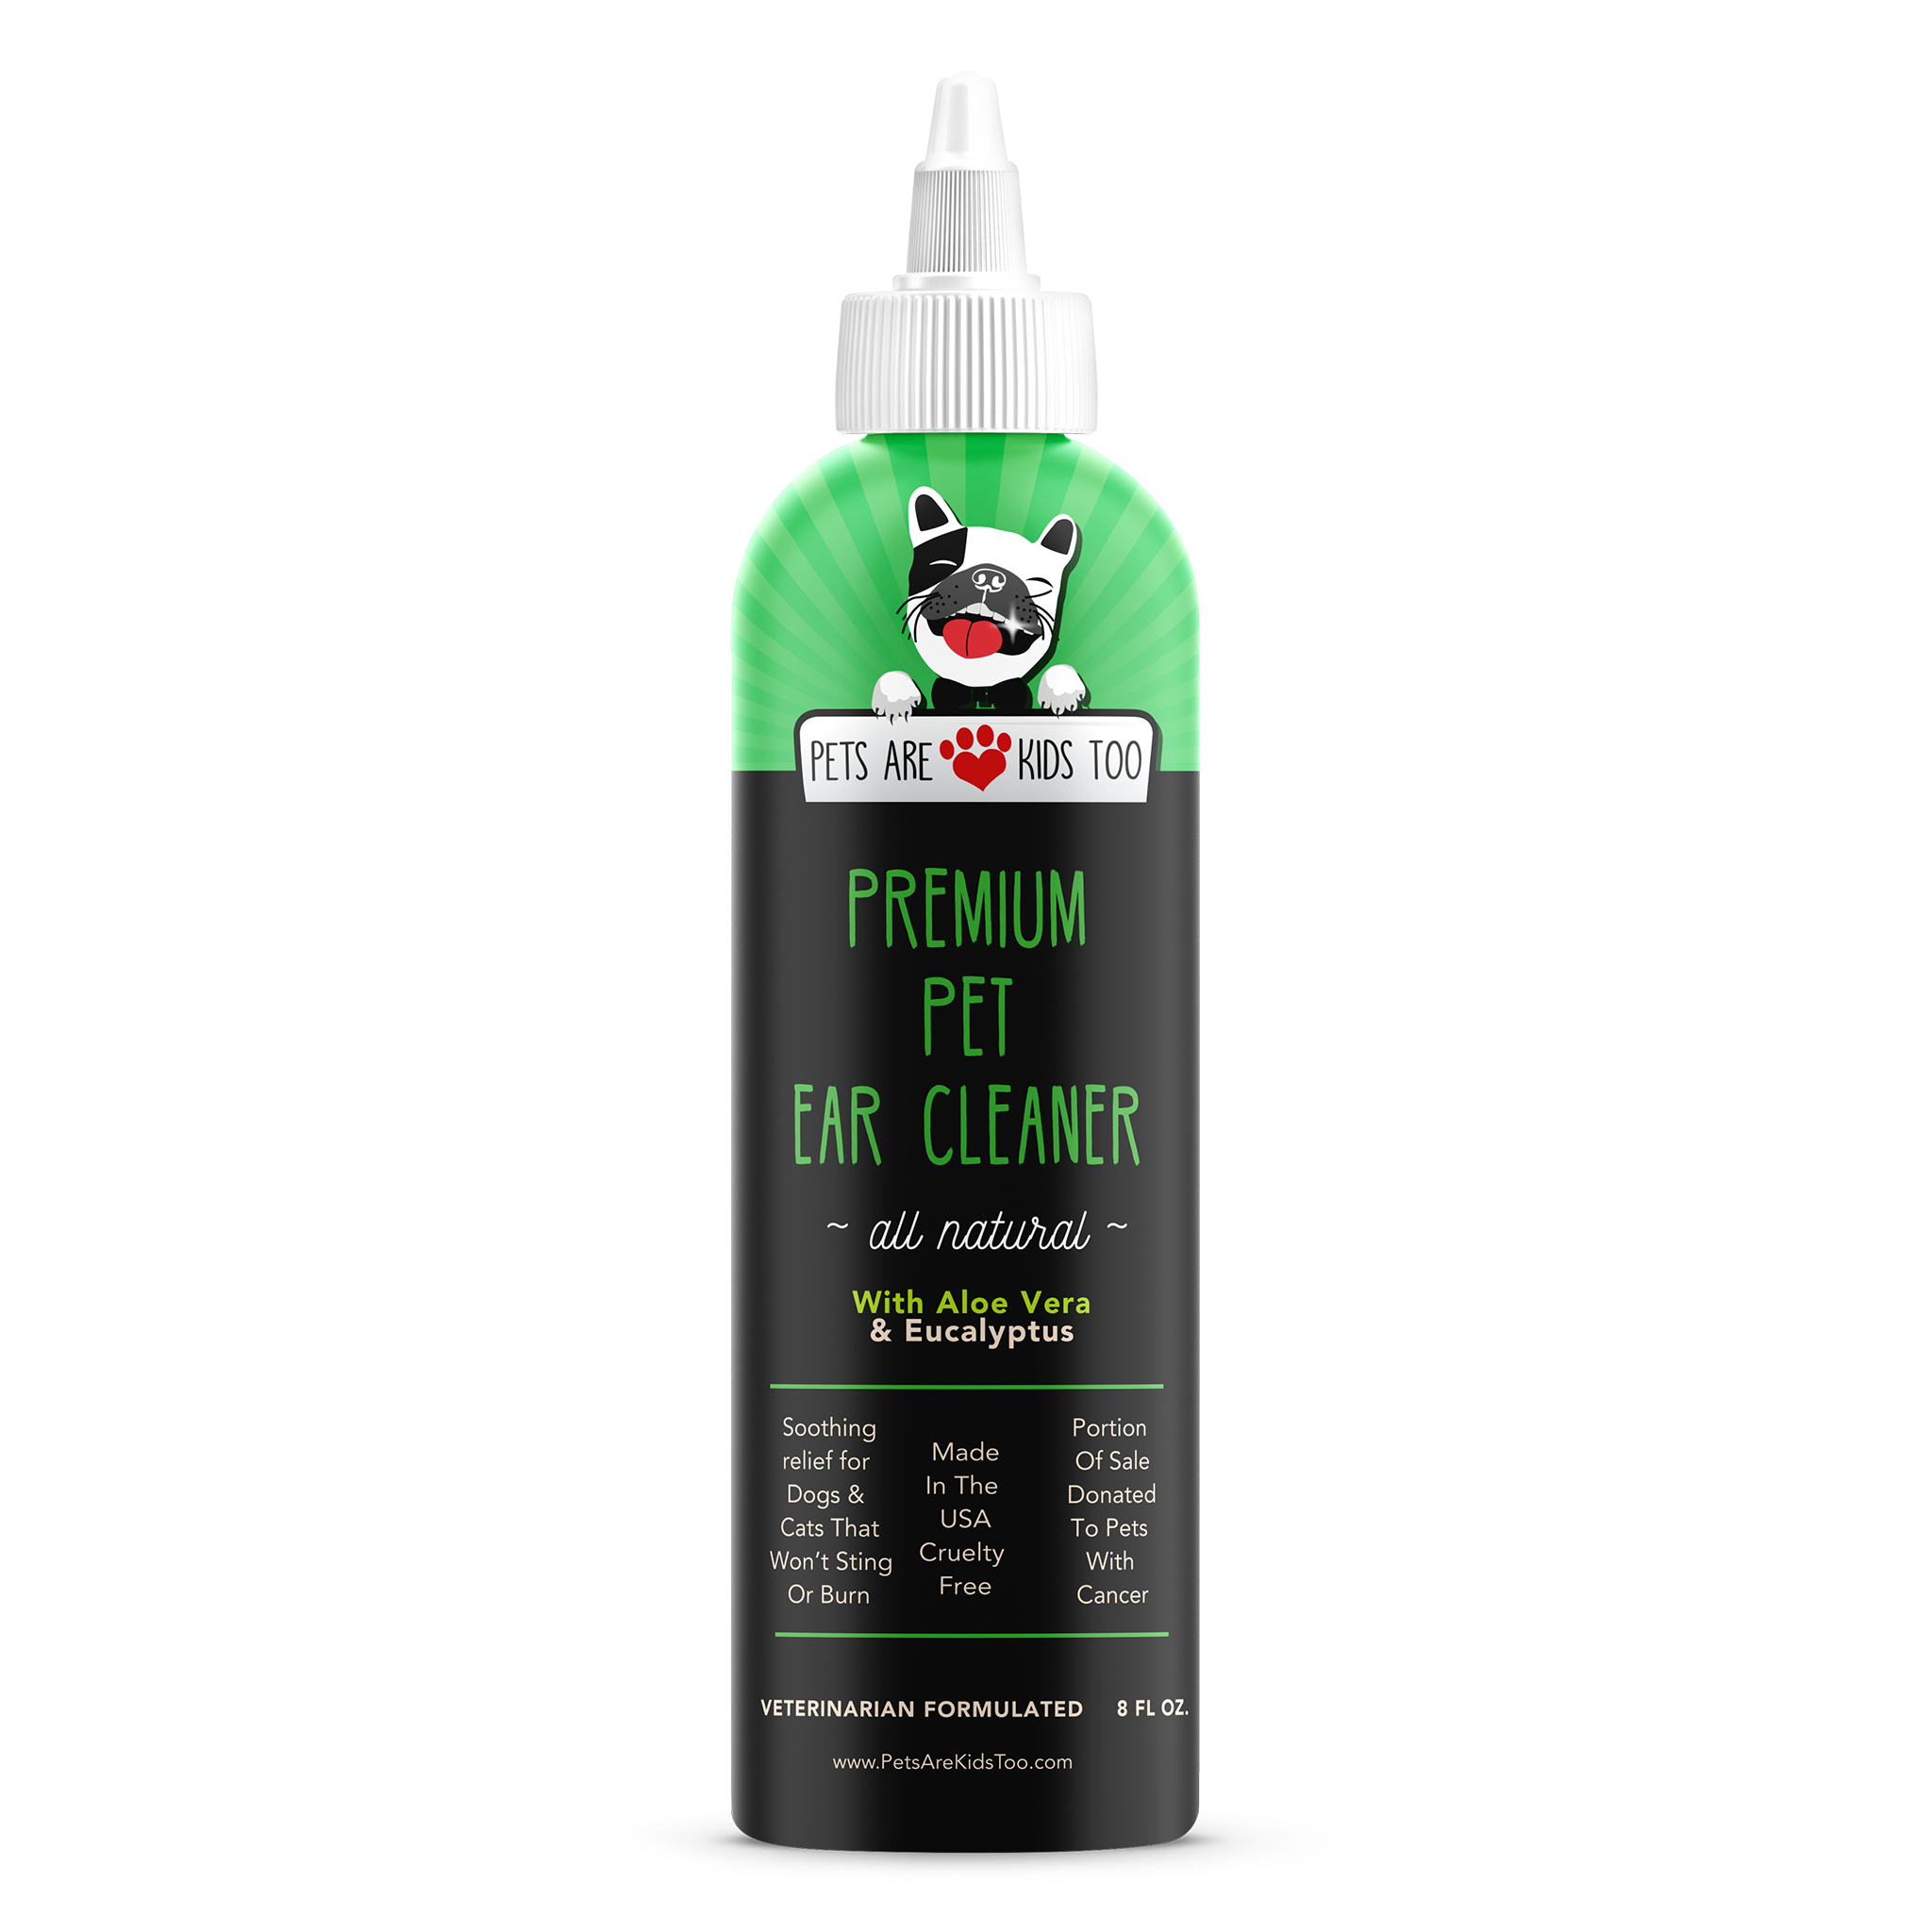 Premium Cat and Dog Ear Cleaner